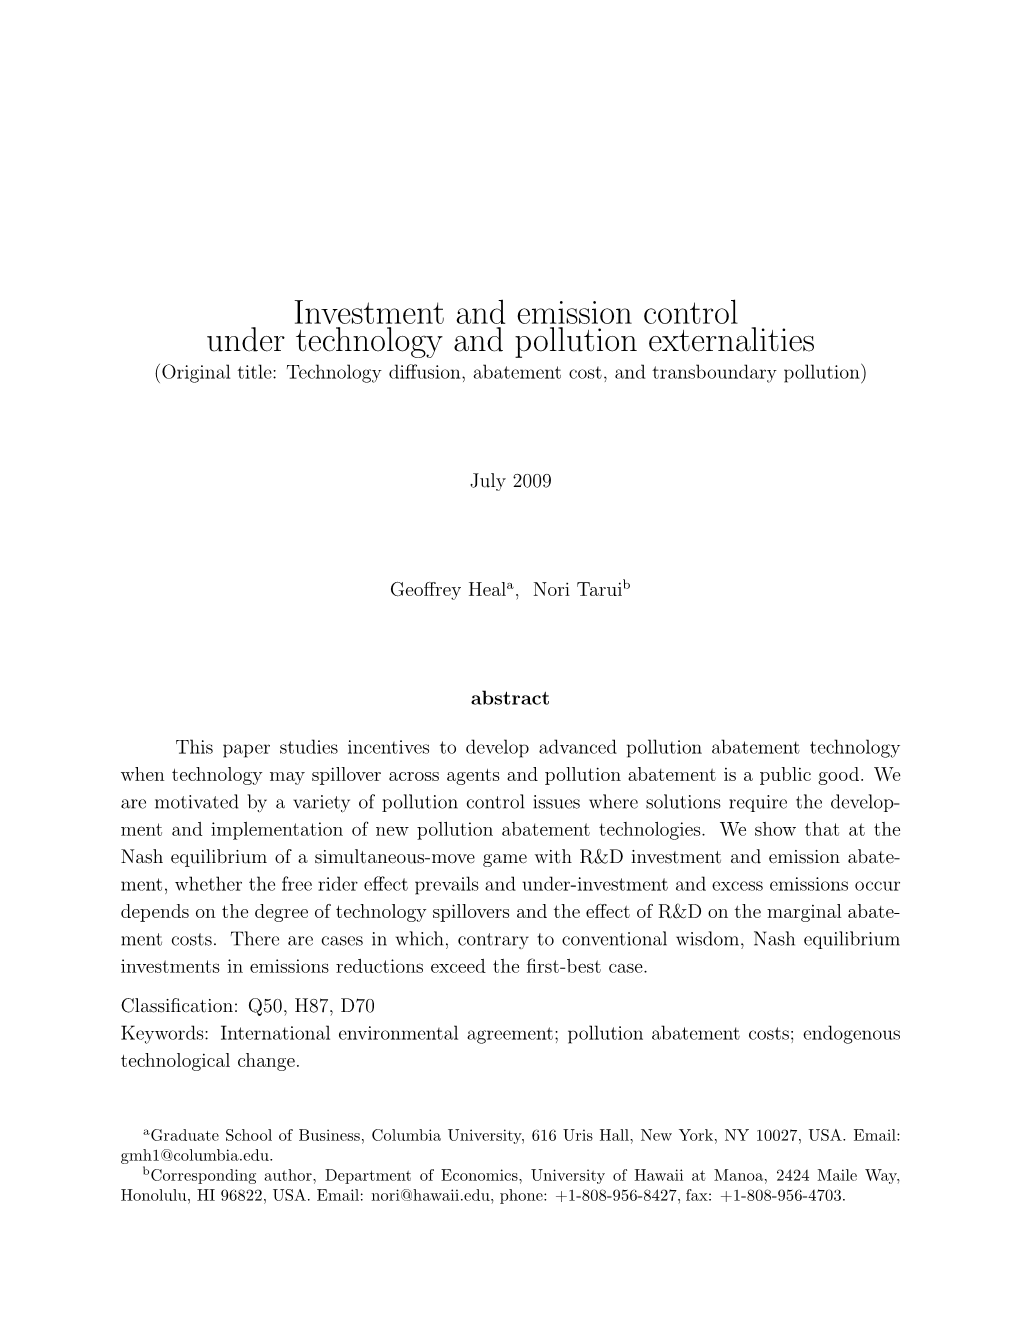 Investment and Emission Control Under Technology and Pollution Externalities (Original Title: Technology Diﬀusion, Abatement Cost, and Transboundary Pollution)